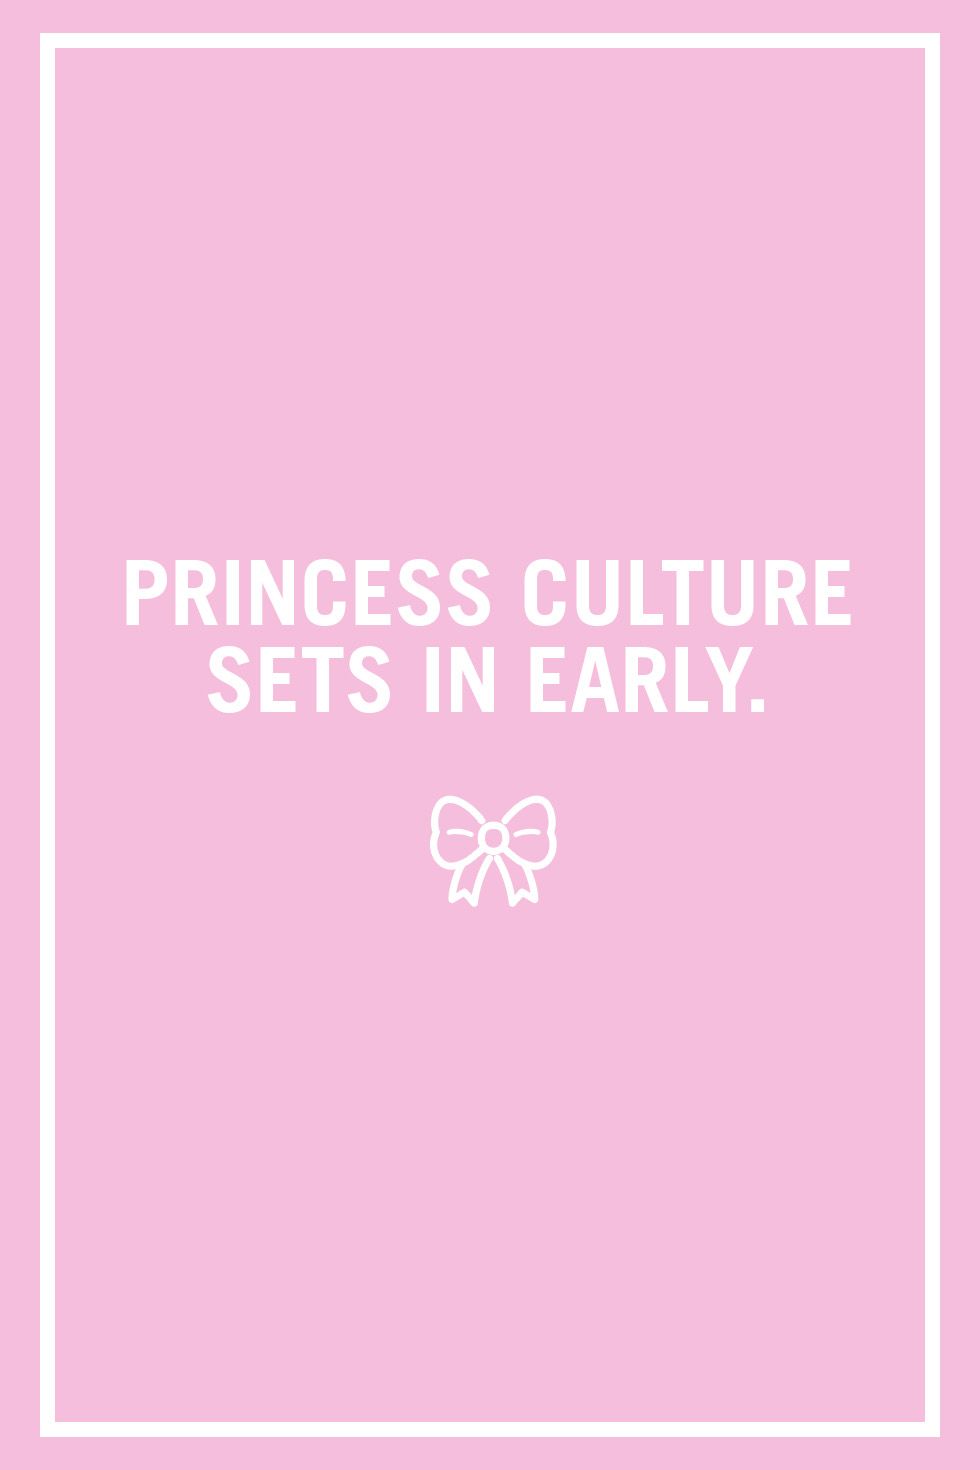 <p>Whether your daughter popped out of the womb in a tiara and fairy wings or hates pink ball gowns with a passion, the <a href="http://www.redbookmag.com/life/mom-kids/news/a47573/mom-updates-princess-book-to-be-feminist/" target="_blank" data-tracking-id="recirc-text-link">princess industrial complex</a> is strong. She'll soon know all the Disney princesses by name, sing all their songs, and <a href="http://www.redbookmag.com/life/friends-family/news/a47749/hulu-disney-movies-streaming/" target="_blank" data-tracking-id="recirc-text-link">see all their movies</a>. You may think you'll lose your mind due to glitter inhalation, but calm down —&nbsp;for most girls, the princess obsession is&nbsp;a phase that passes all too quickly, and before you know it&nbsp;you'll miss the days when she wandered around the house singing ah-ah-ahhhhhh Ariel-style. &nbsp;<span class="redactor-invisible-space" data-verified="redactor" data-redactor-tag="span" data-redactor-class="redactor-invisible-space"></span></p>